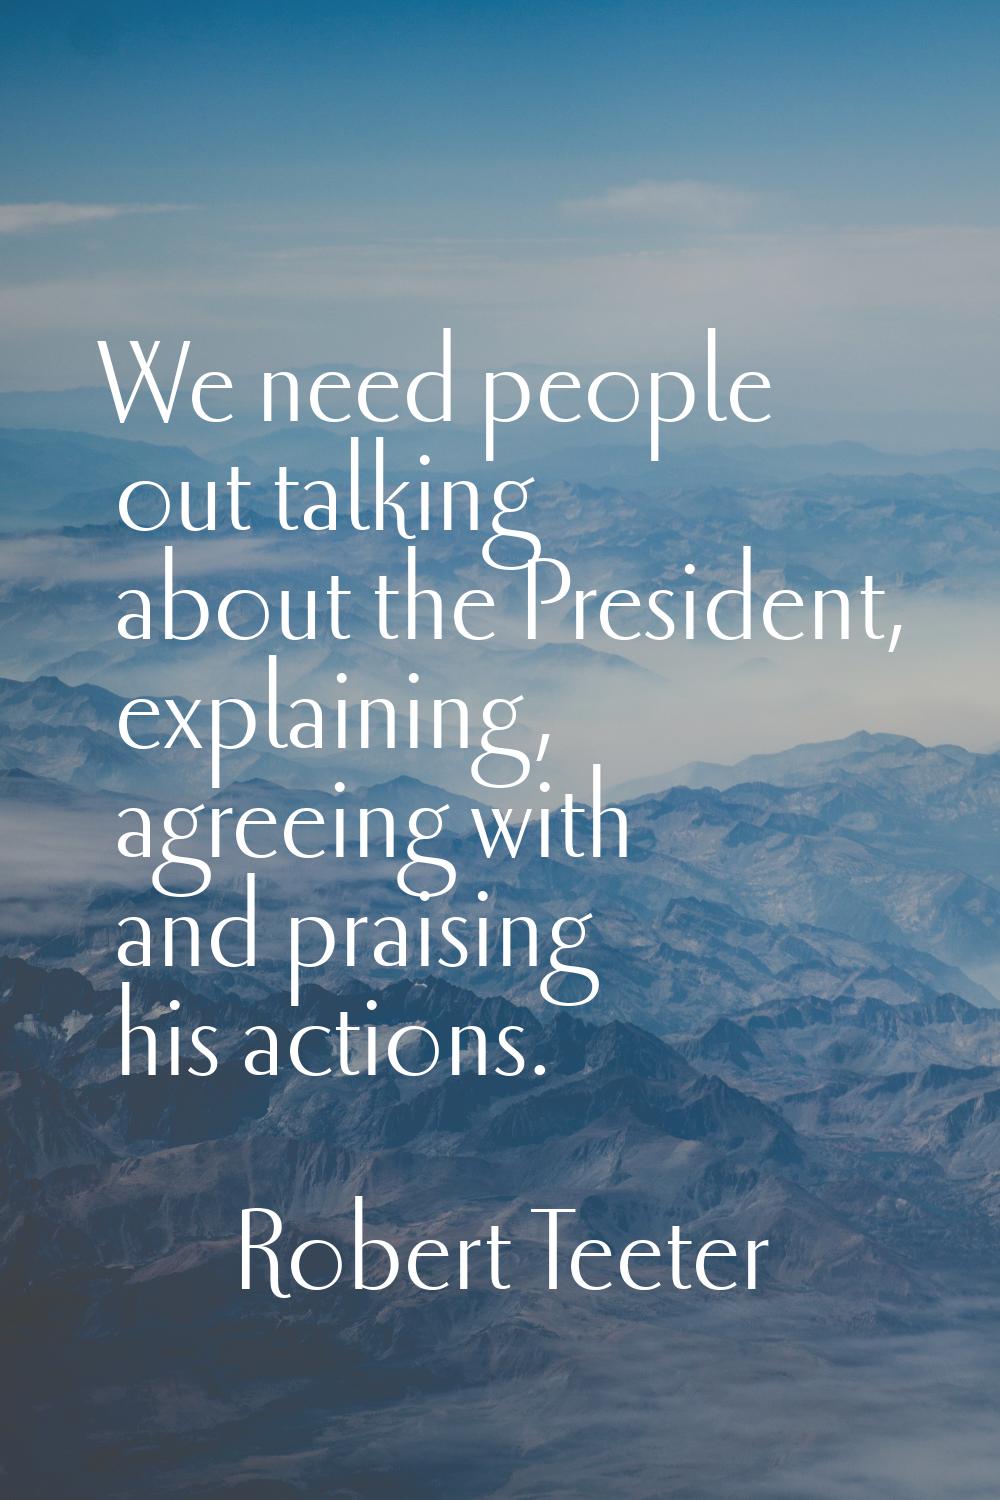 We need people out talking about the President, explaining, agreeing with and praising his actions.